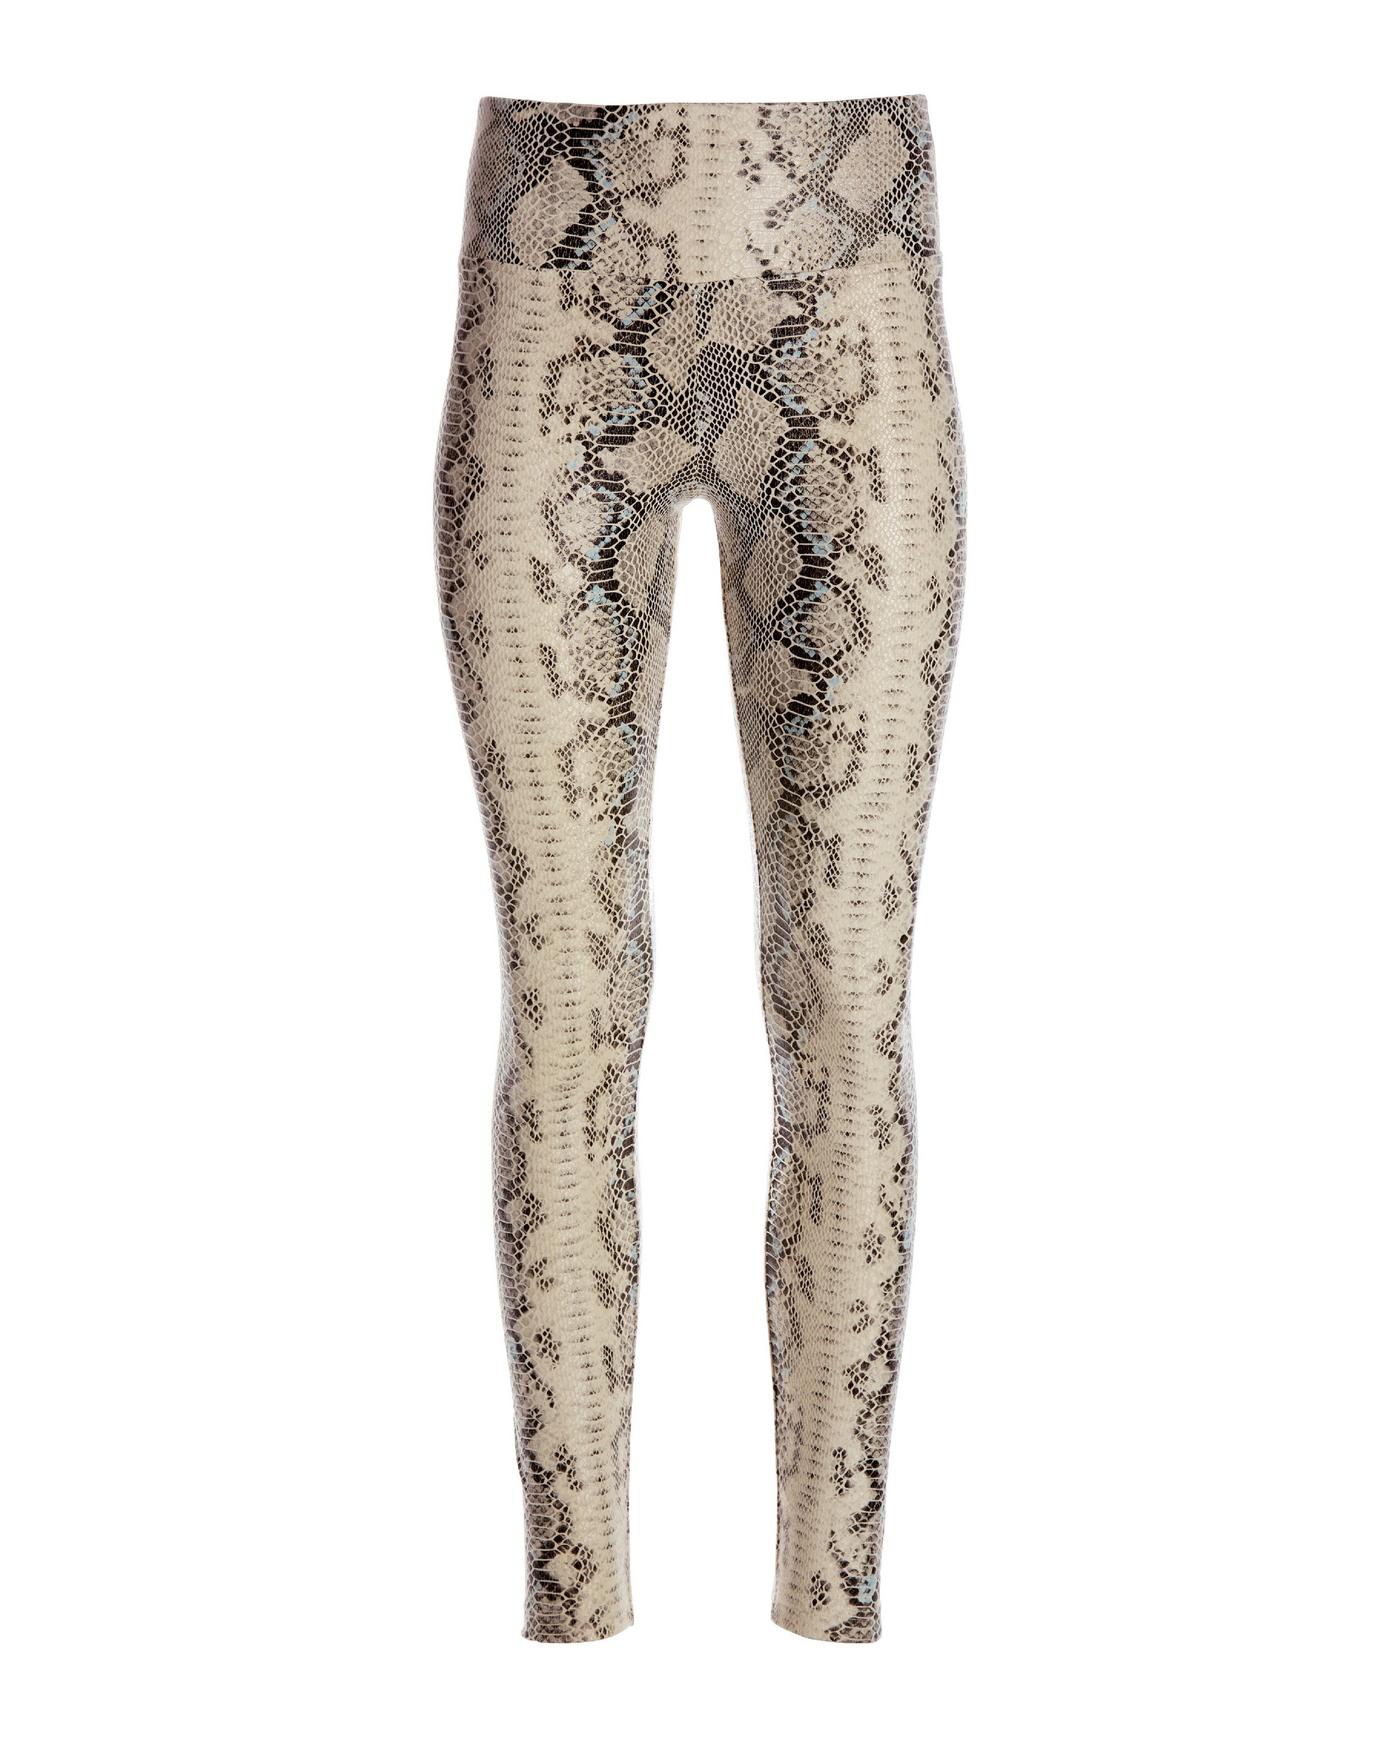 NEW IN PACKAGE! Small SPANX ASSETS bronze snakeskin 🐍 leggings! Closet  cleanout 